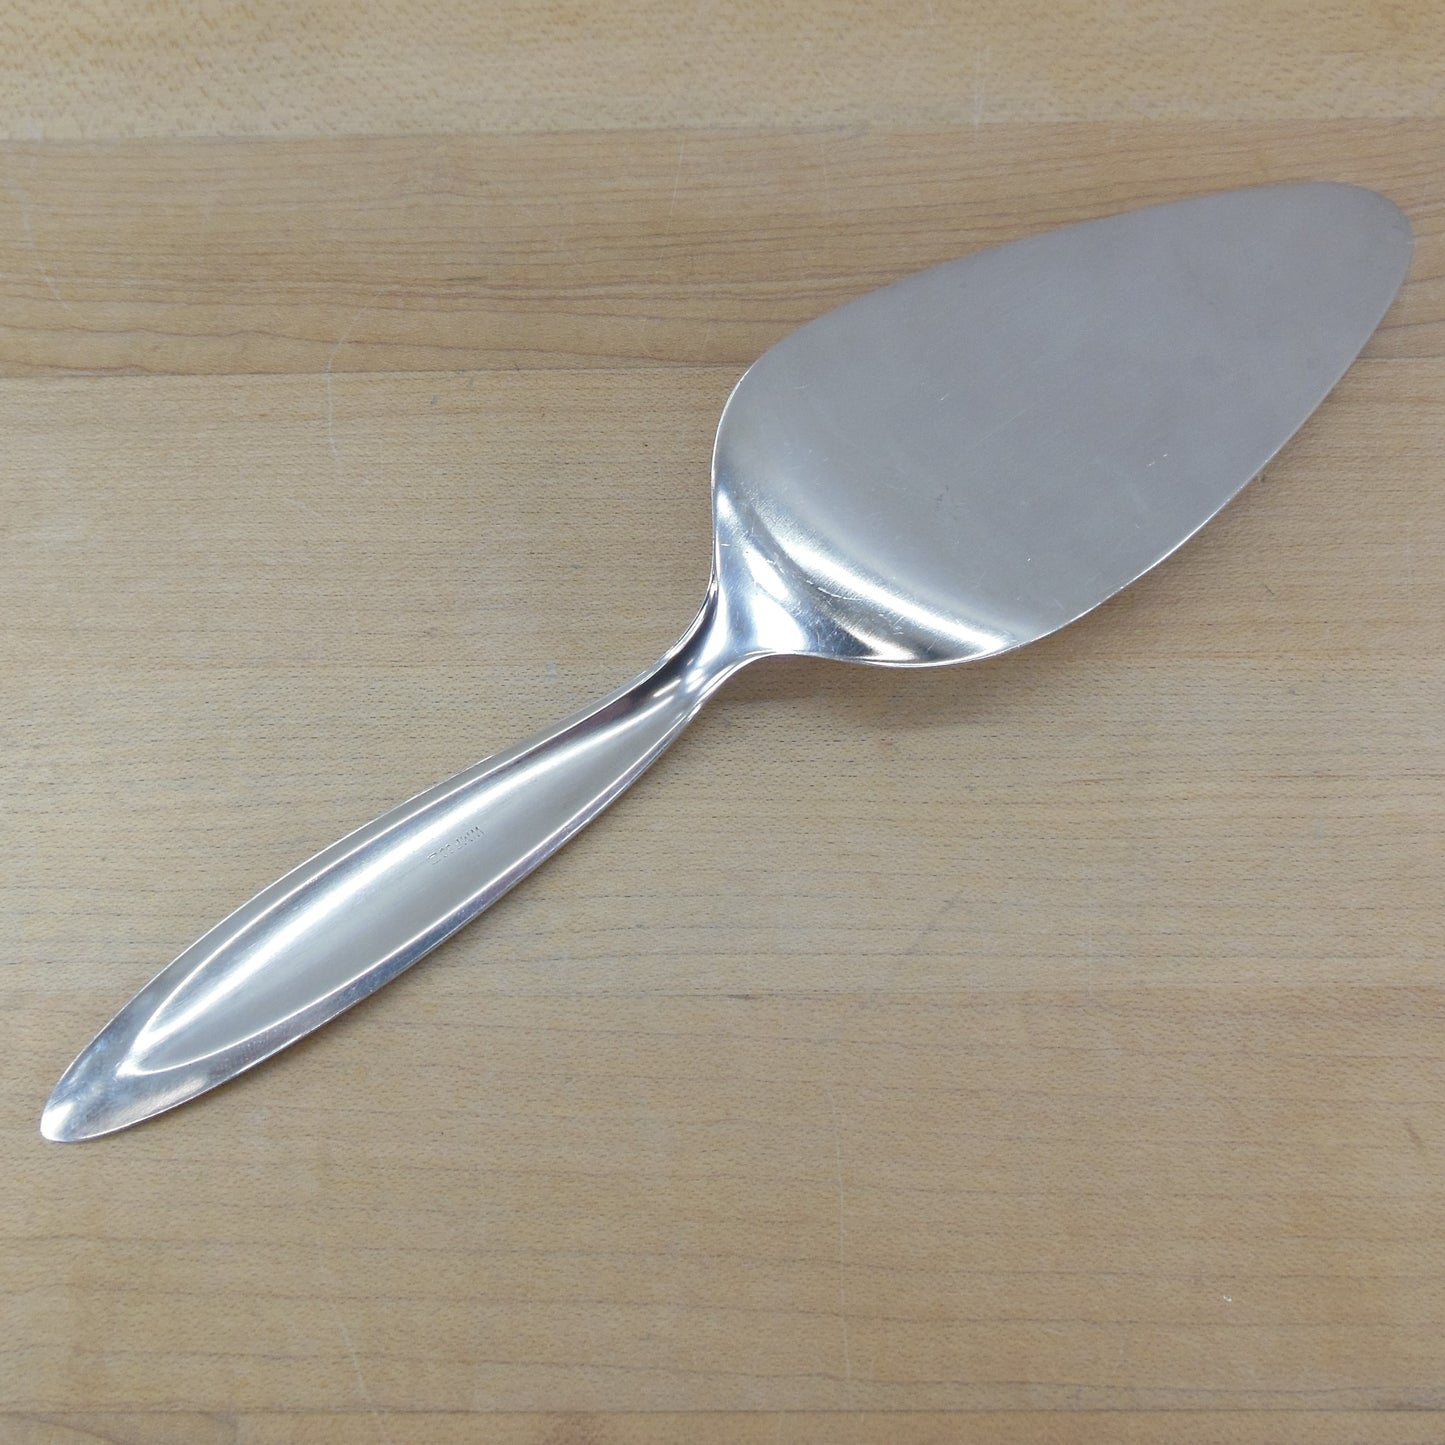 WMF Germany Silverplate 90 Cake Pie Server - Unknown Pattern Outline Pointed Tip used